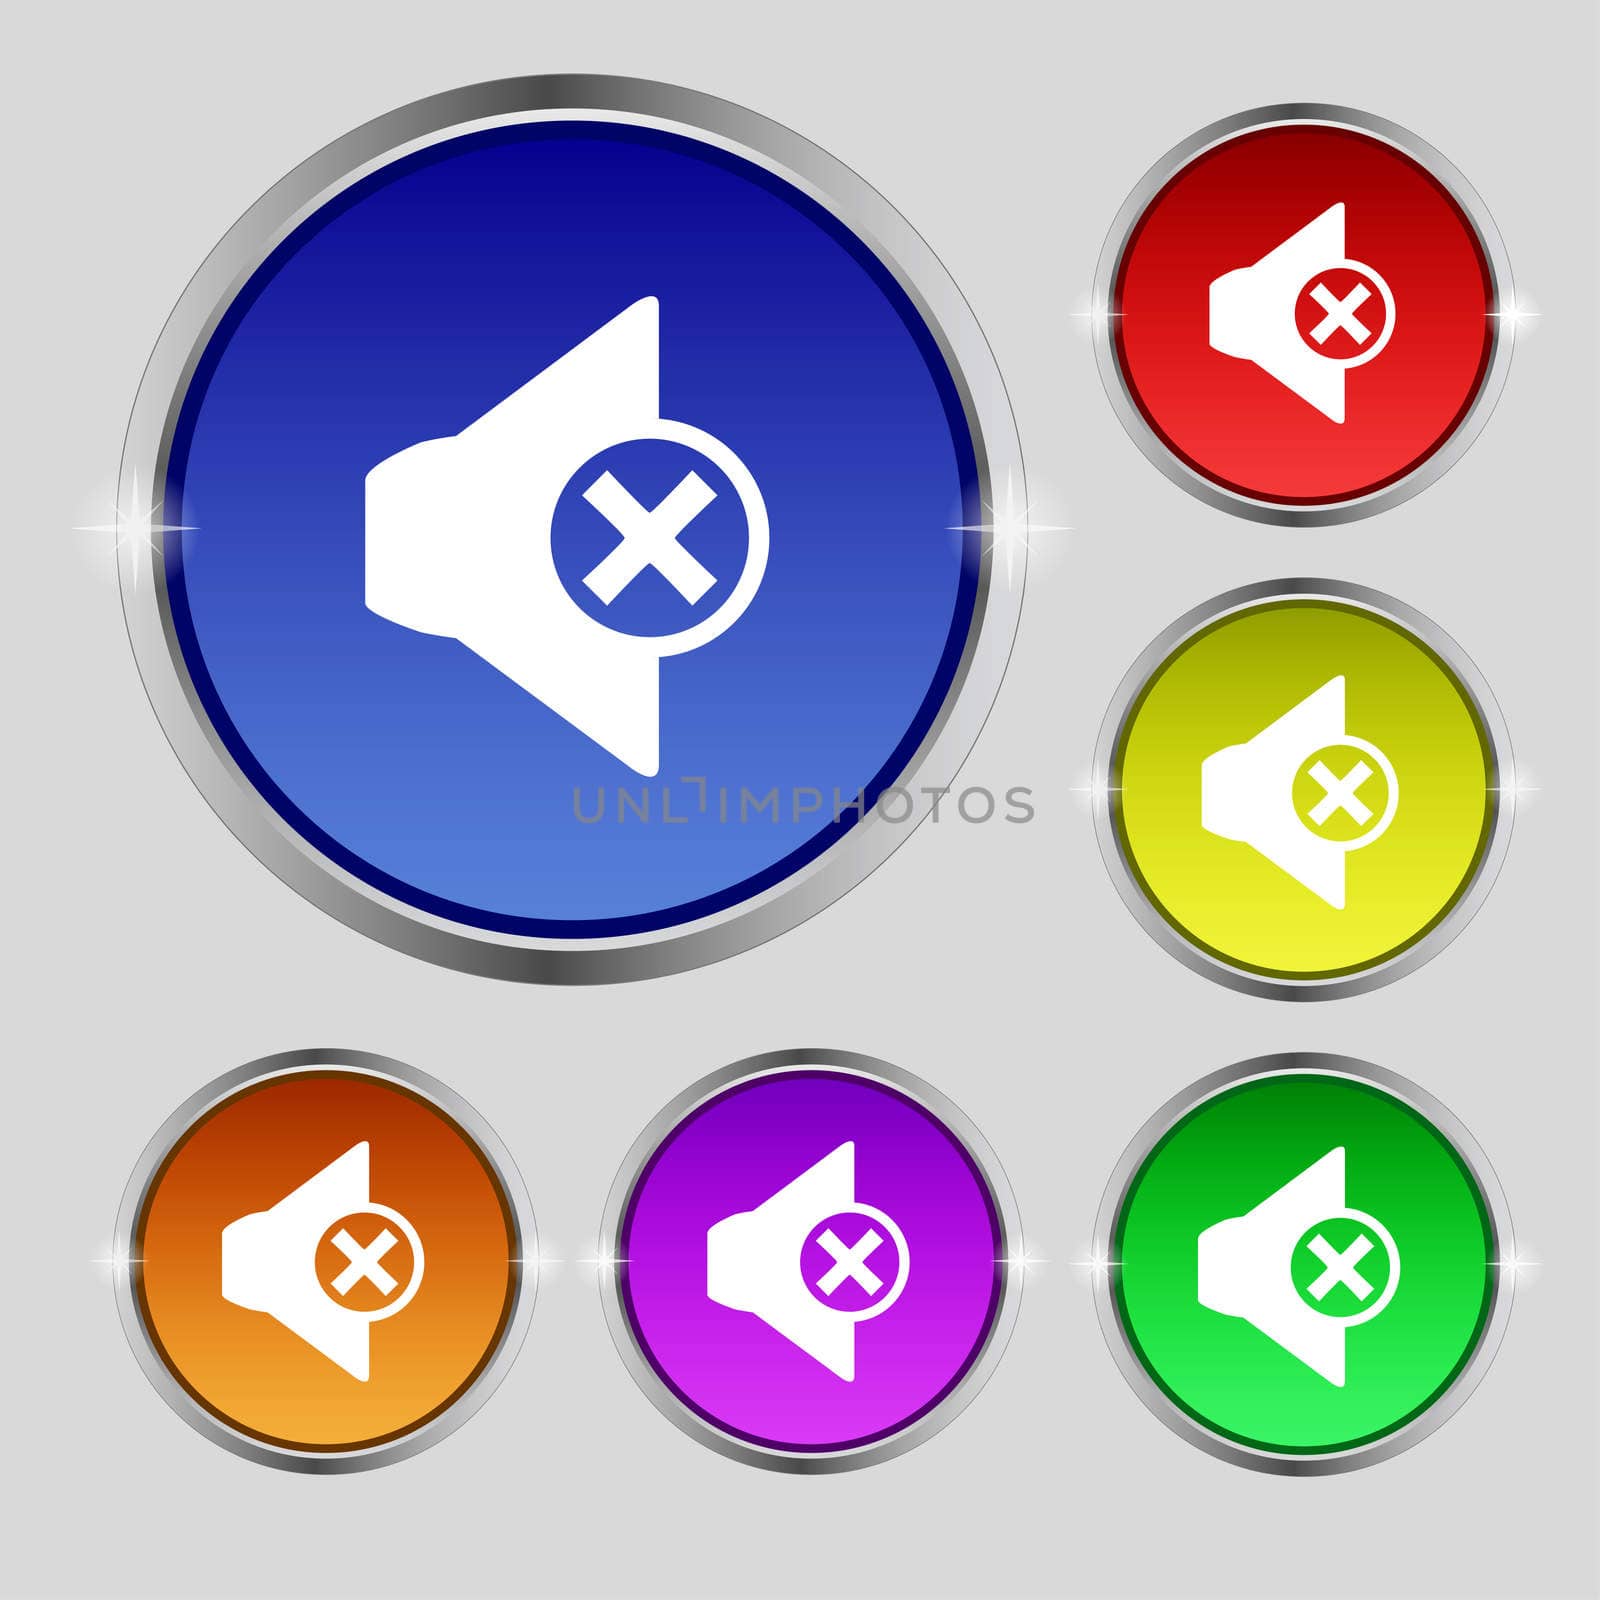 Mute speaker sign icon. Sound symbol. Set of colourful buttons. illustration